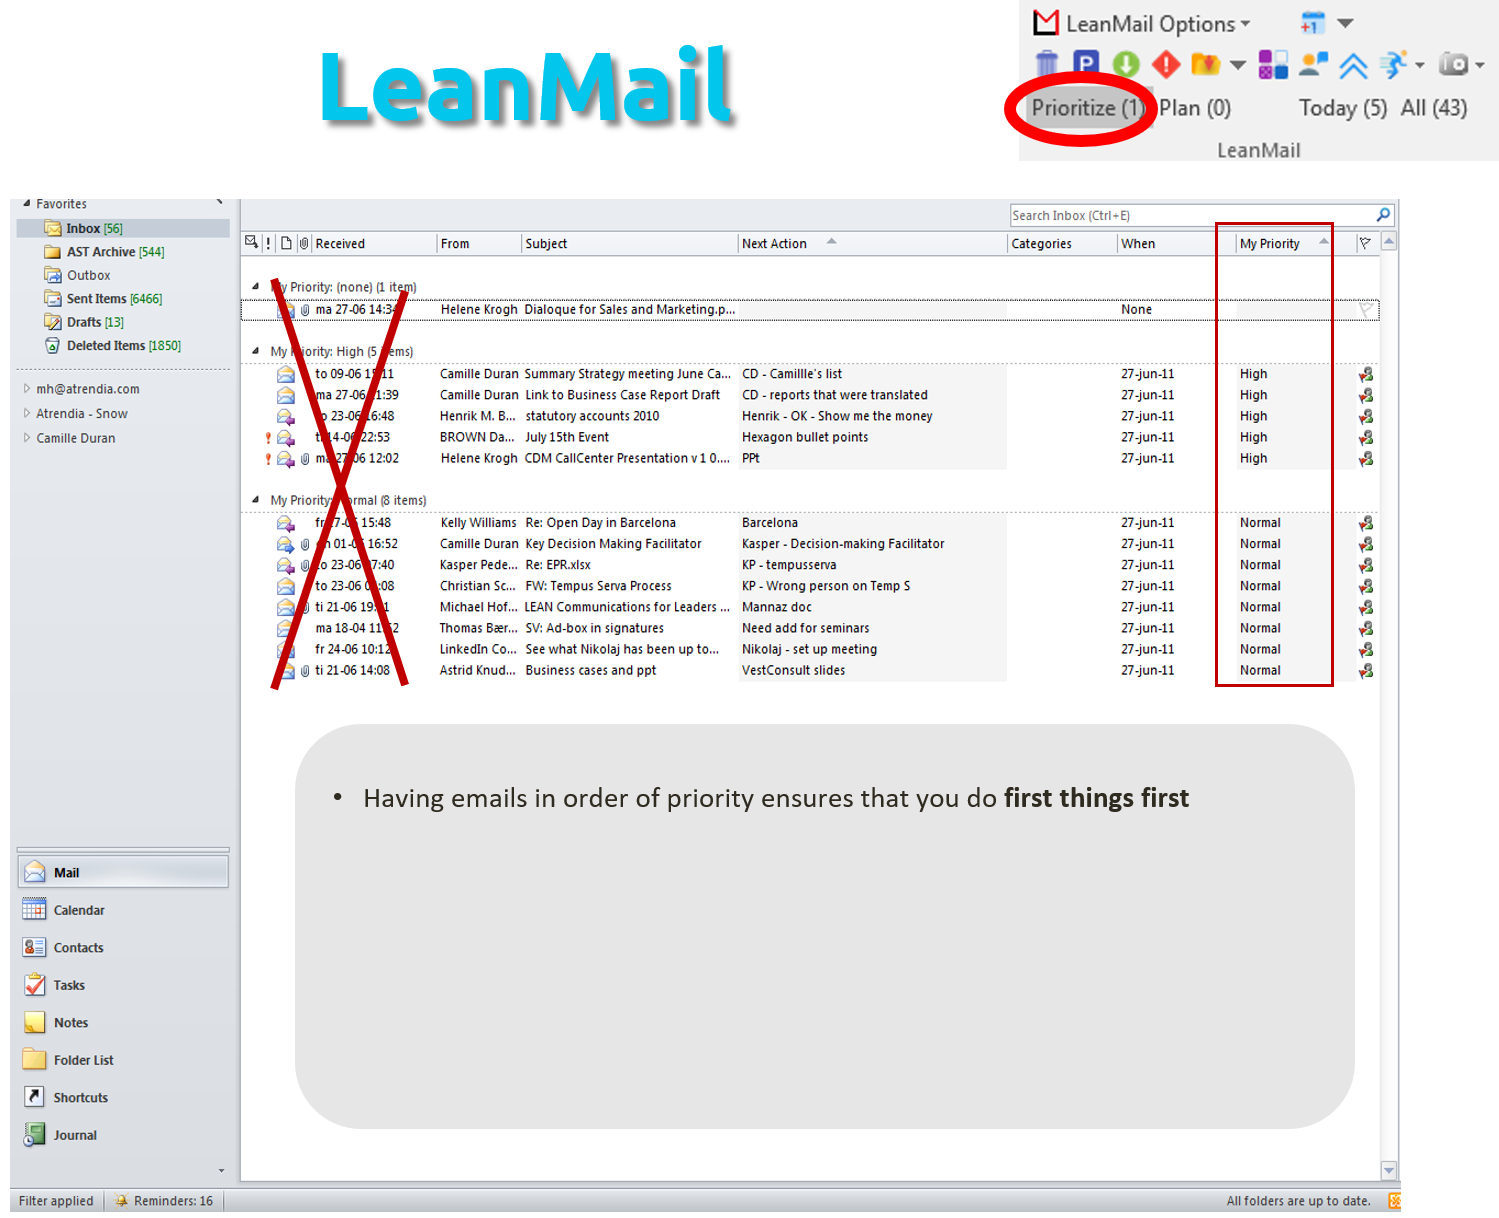 LeanMail Prioritize